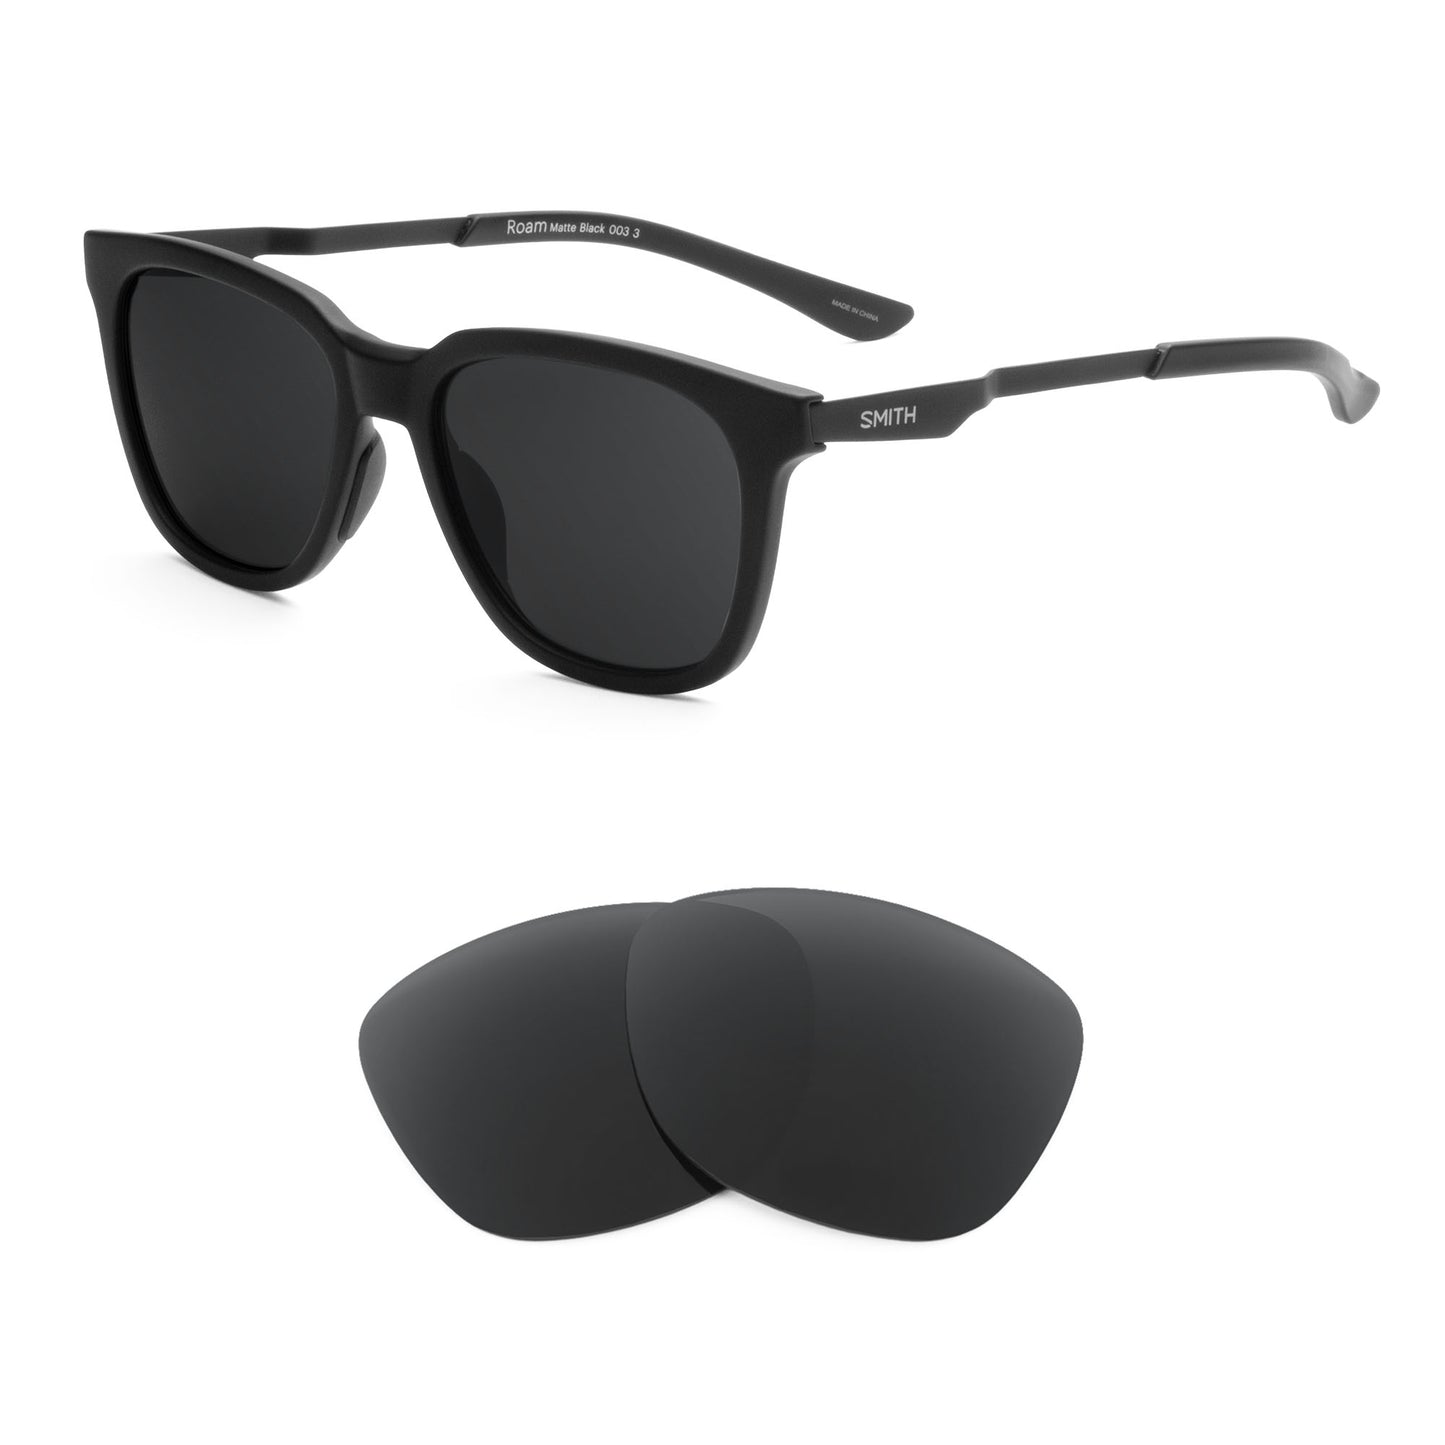 Smith Roam sunglasses with replacement lenses